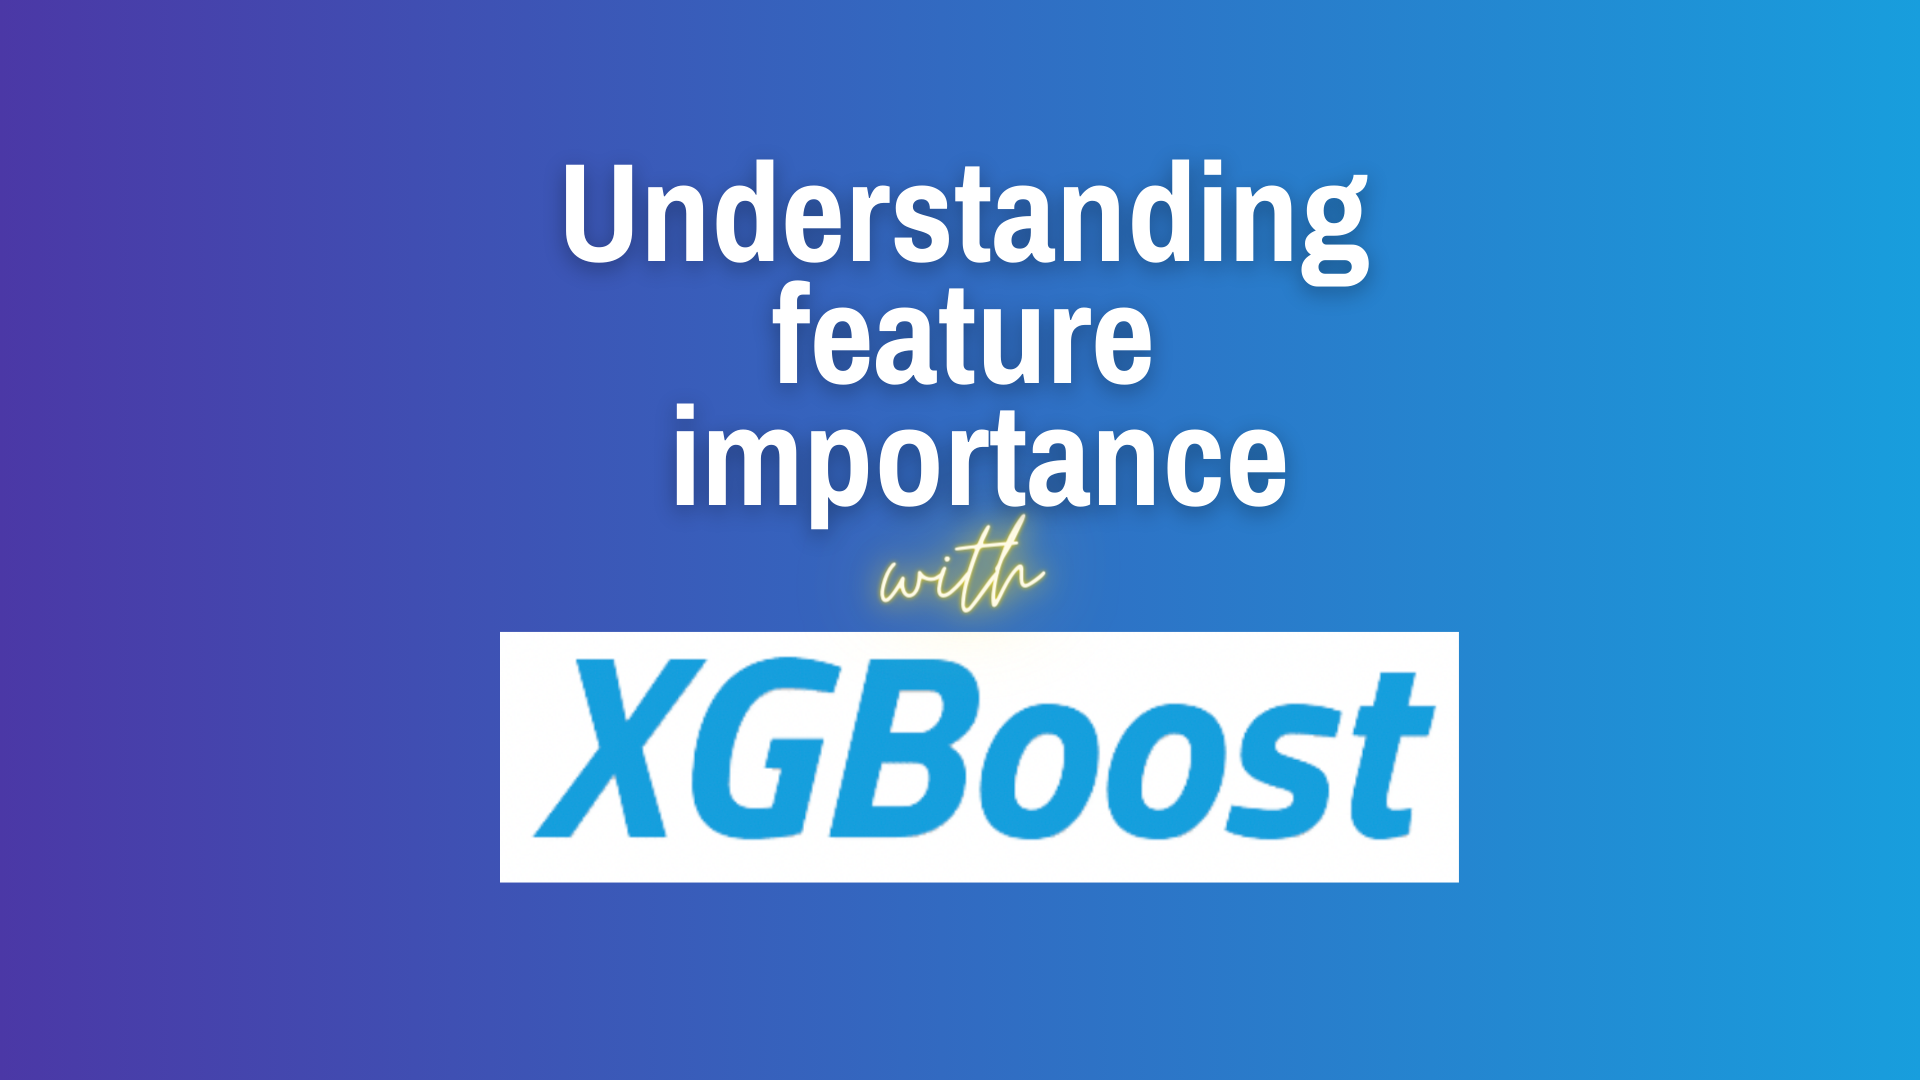 How to use Feature Importance with XGBoost